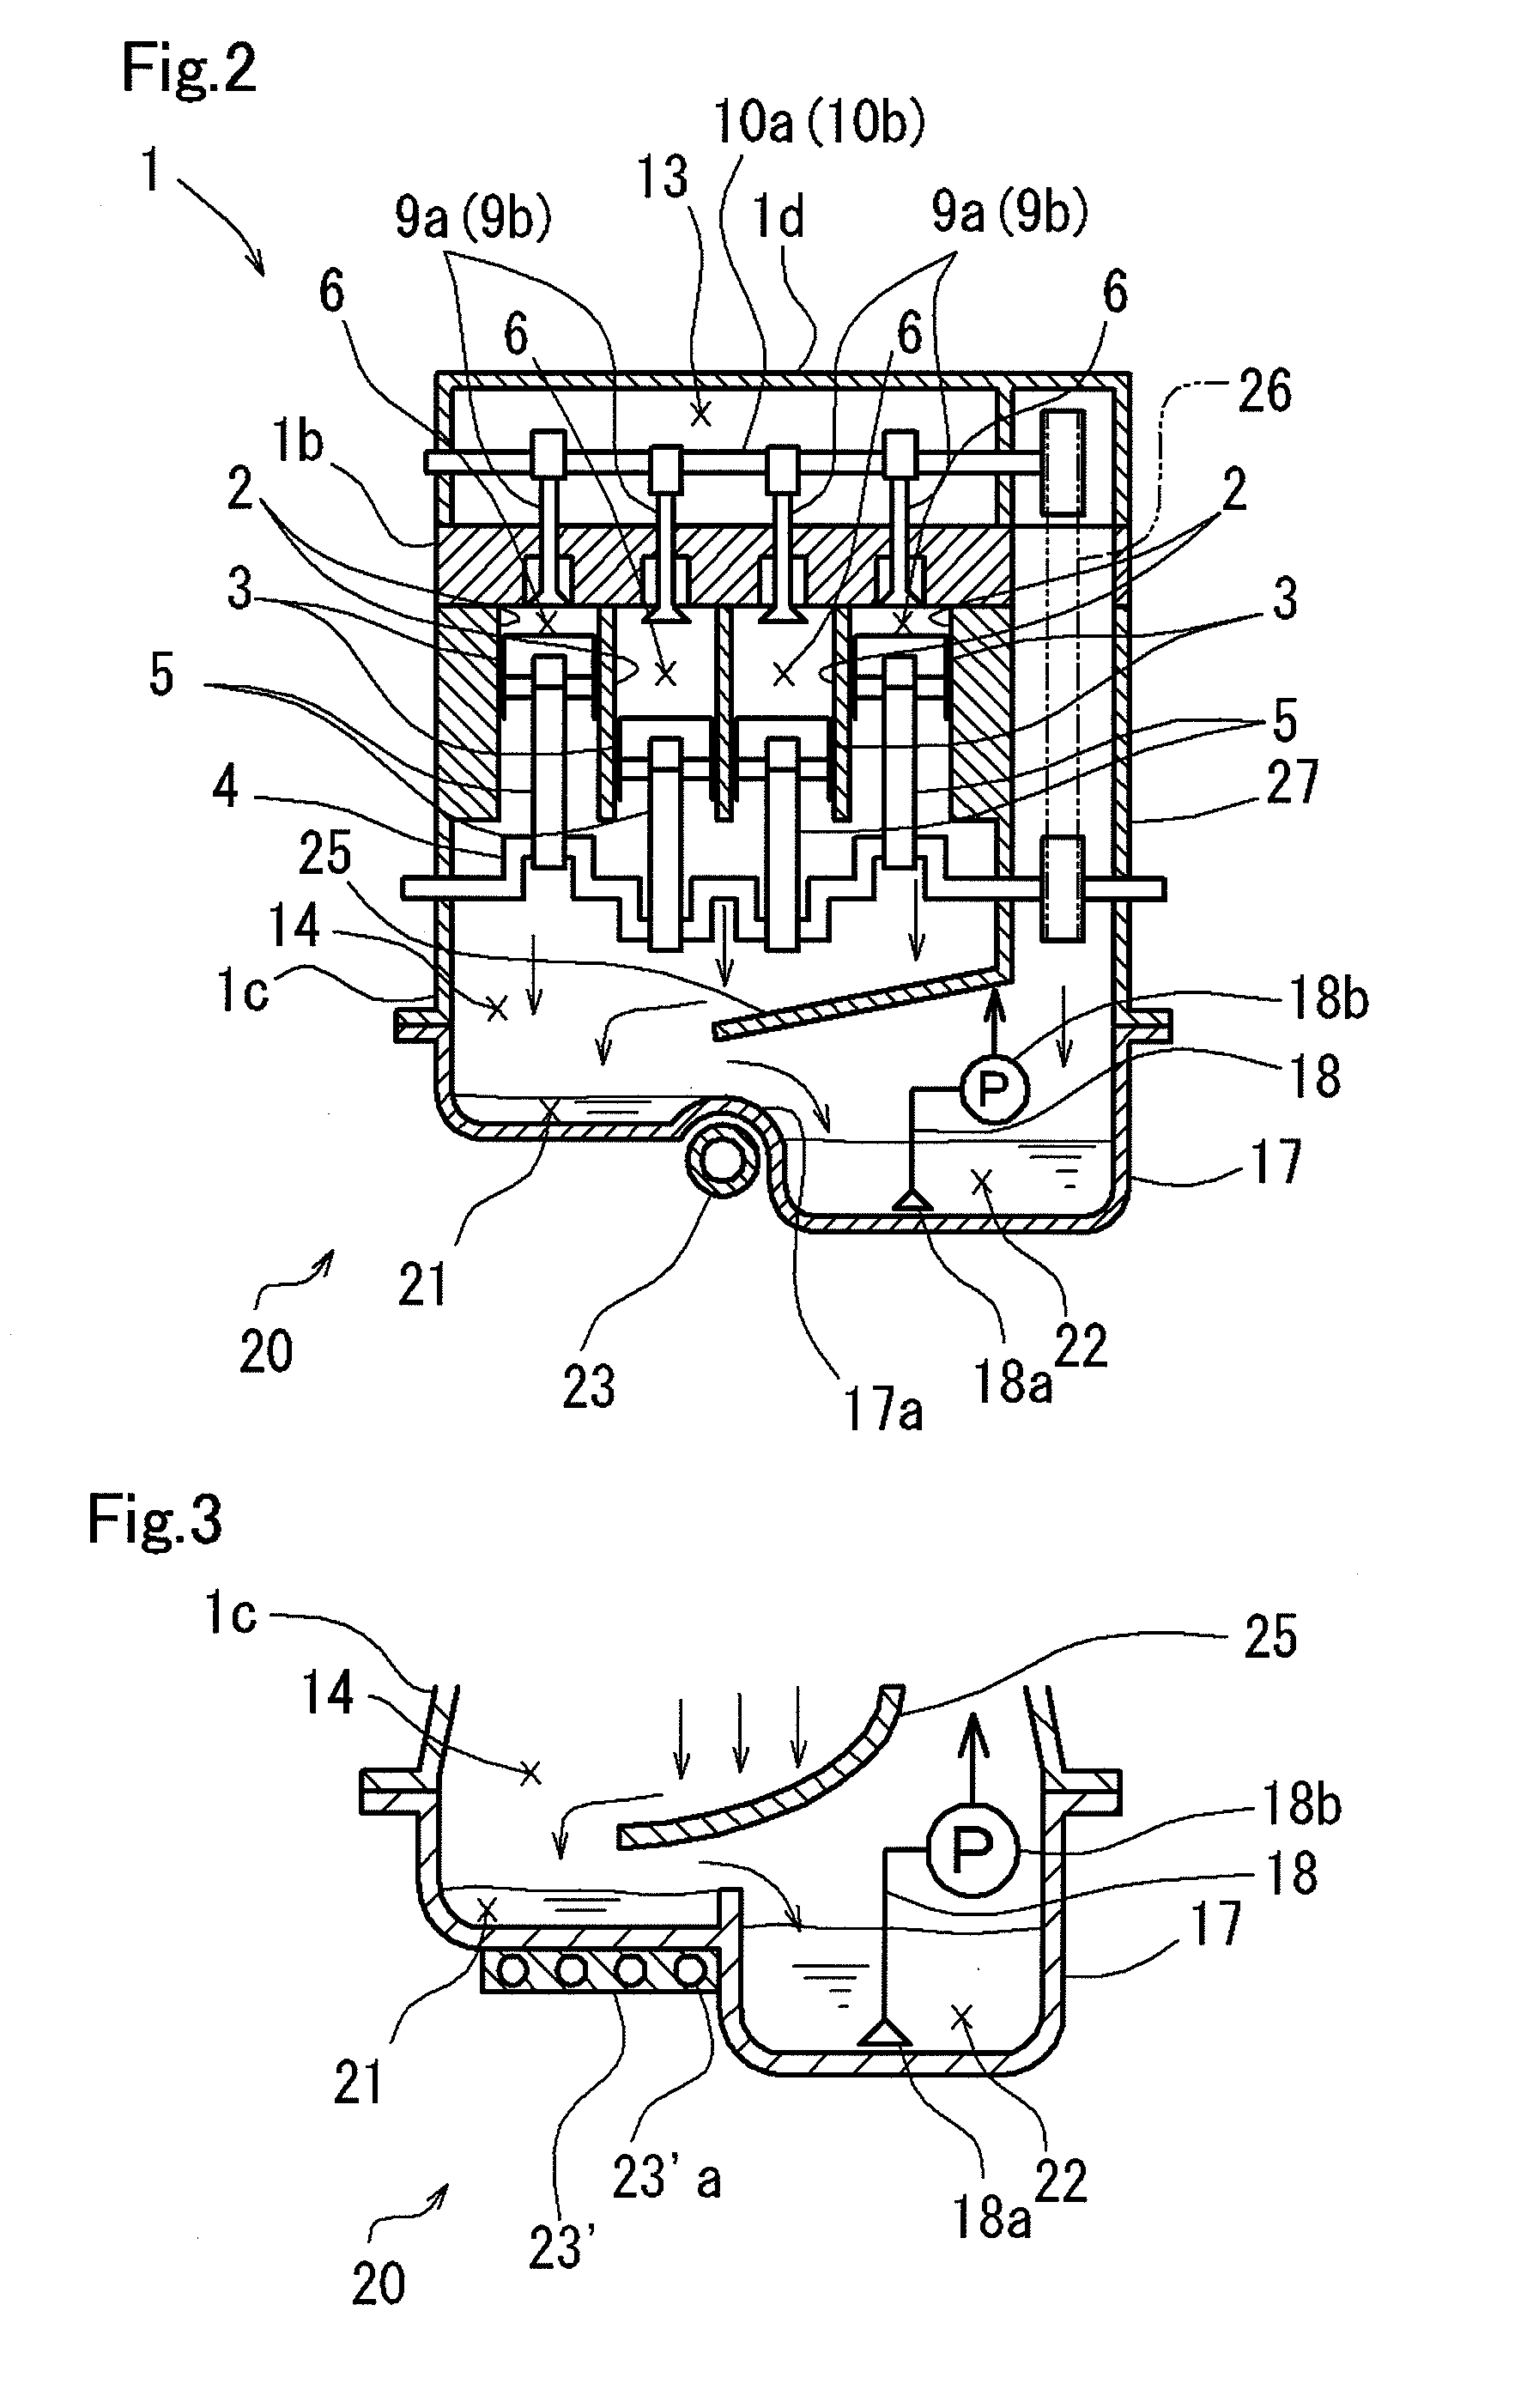 Diluting fuel-in-oil separating apparatus of internal combustion engine